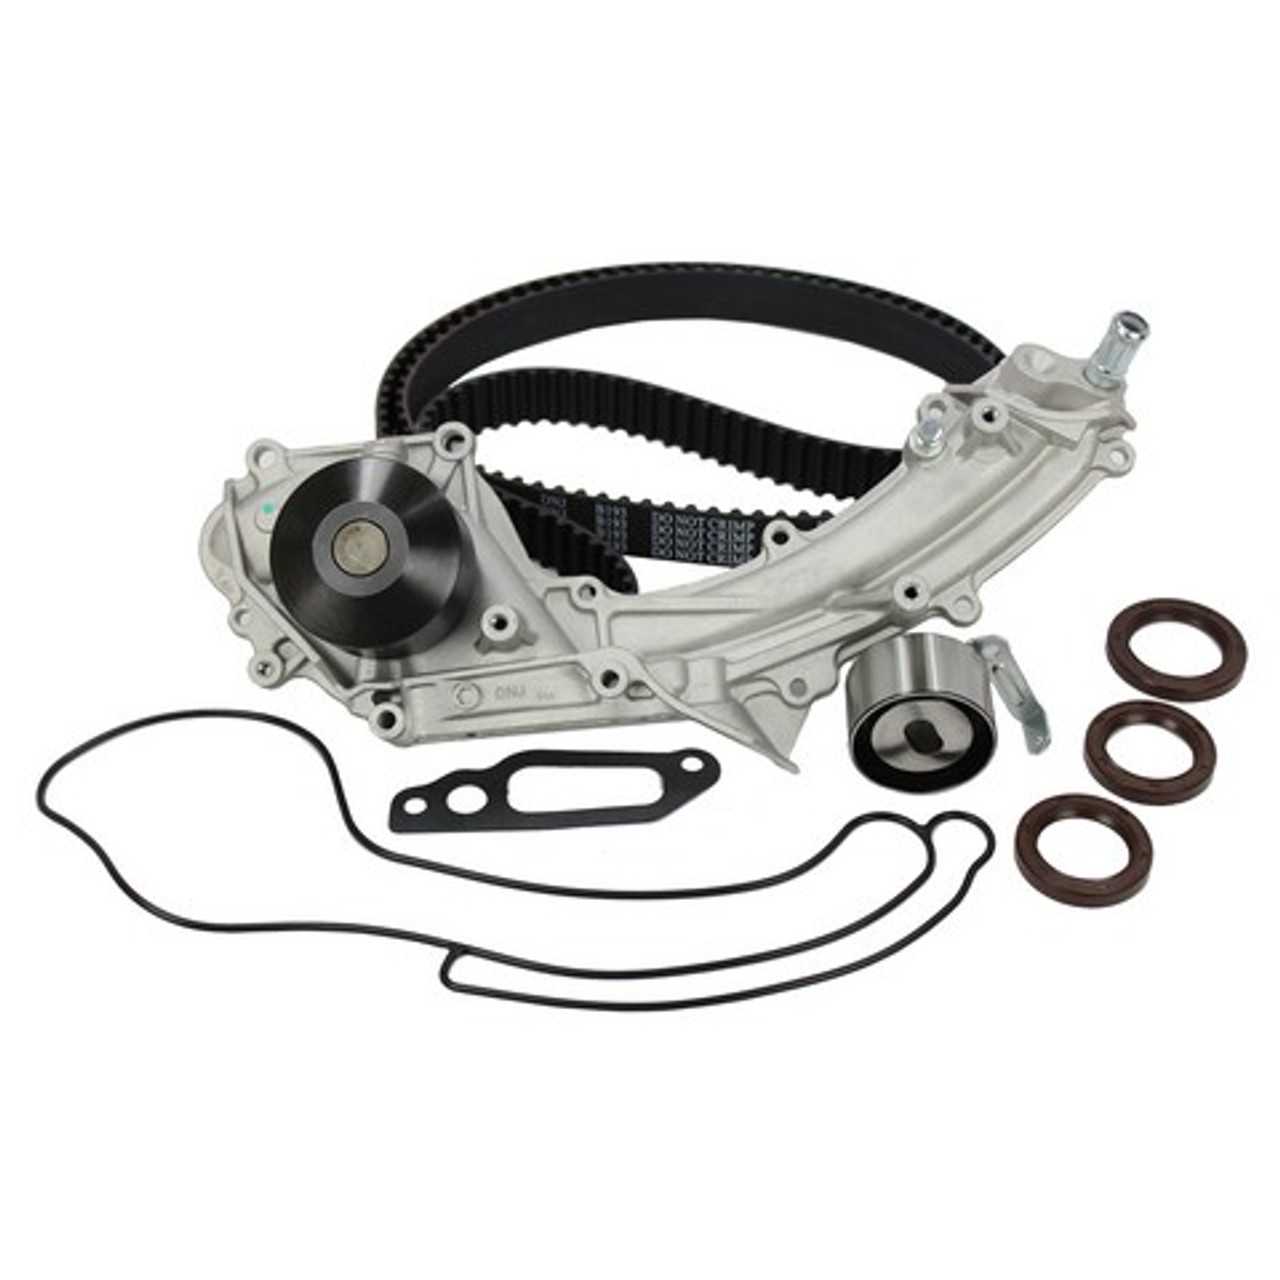 Timing Belt Kit with Water Pump 3.2L 1991 Acura Legend - TBK282AWP.1